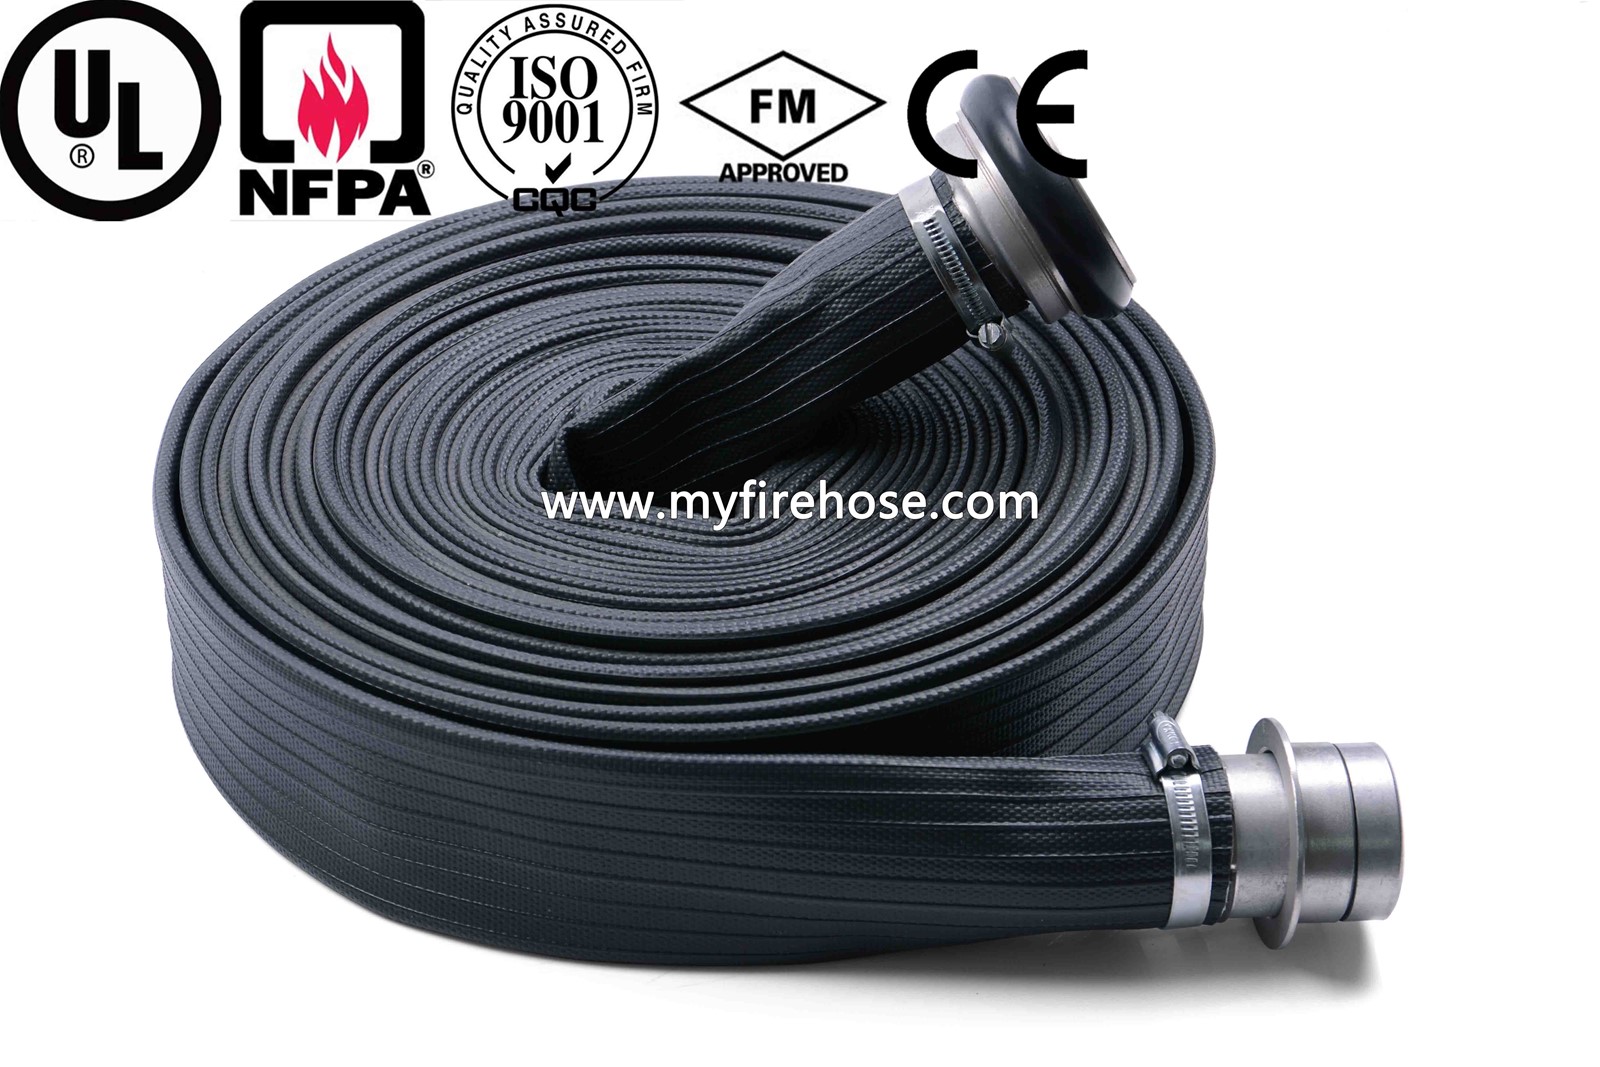 Pu High Pressure Durable Fire Water Hose Price With Fire Hose